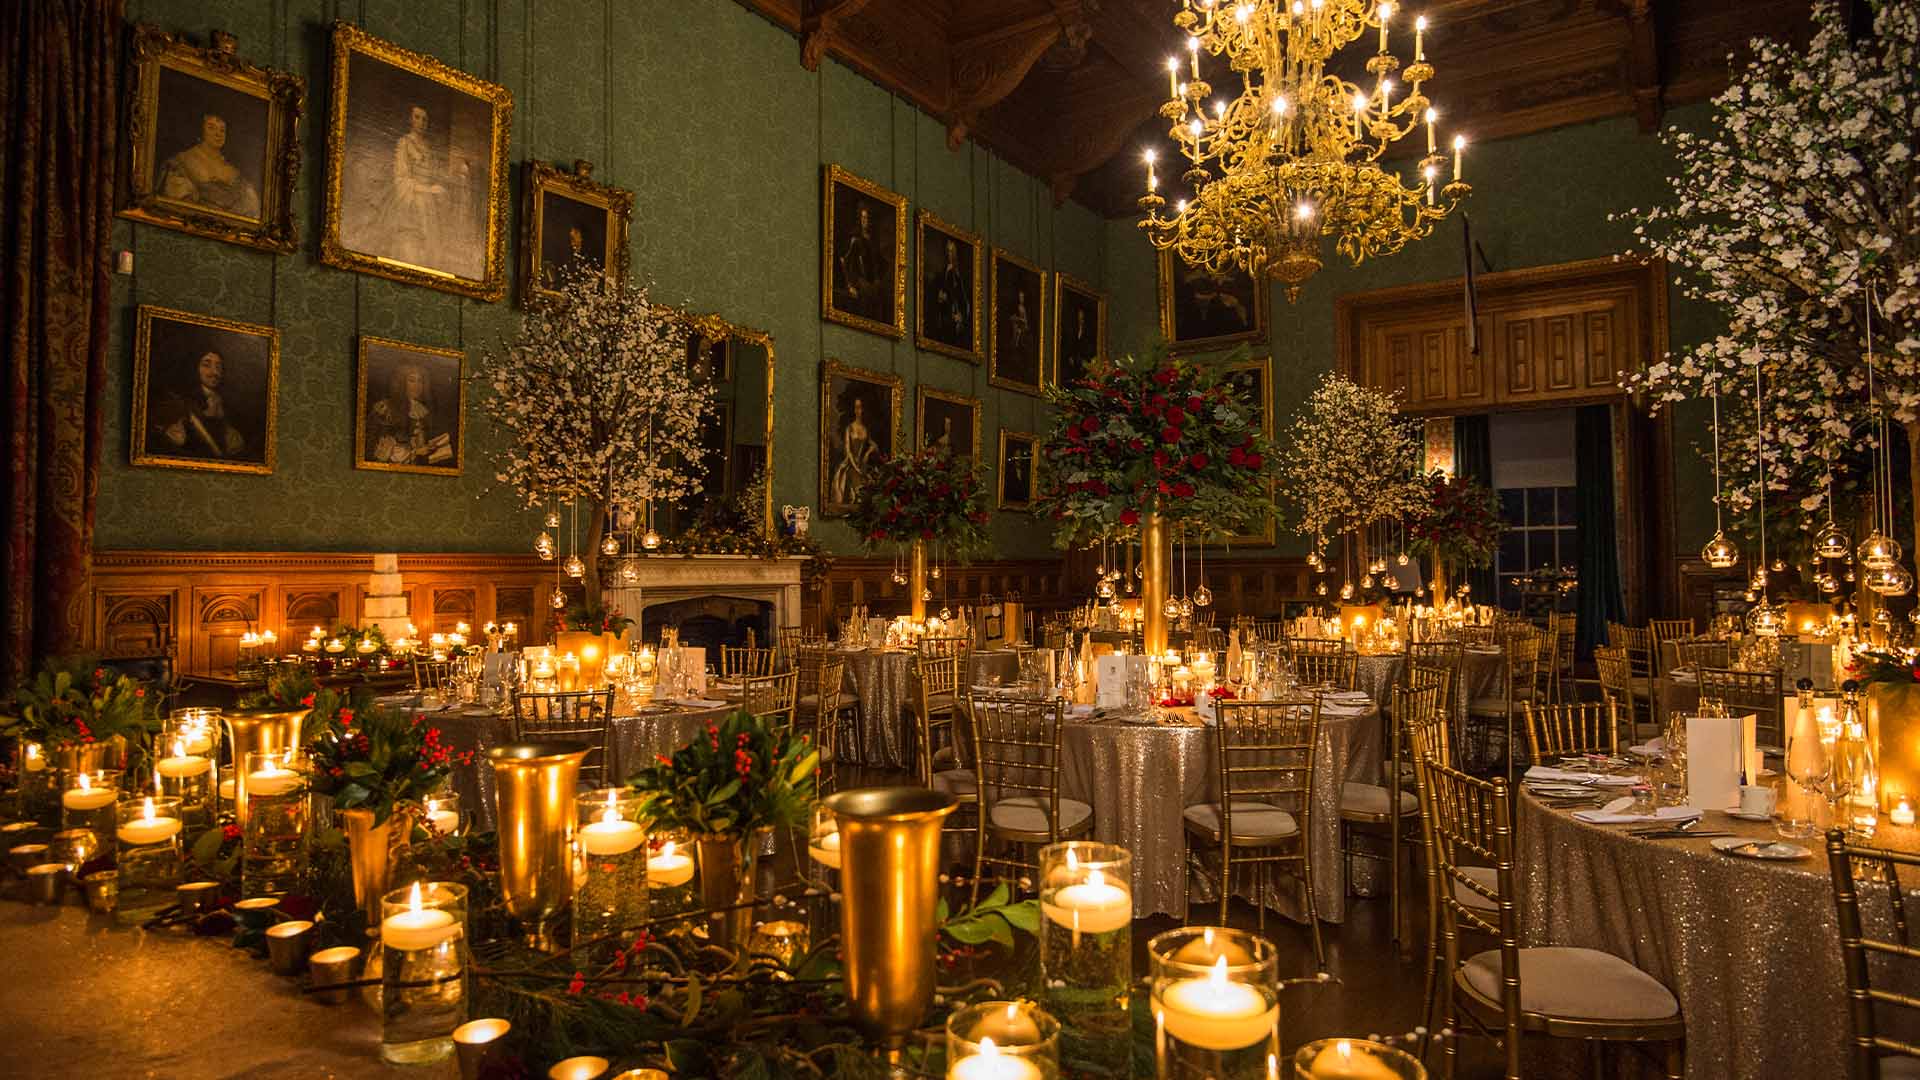 Christmas wedding dining room setting with Christmas flower arrangements and candles